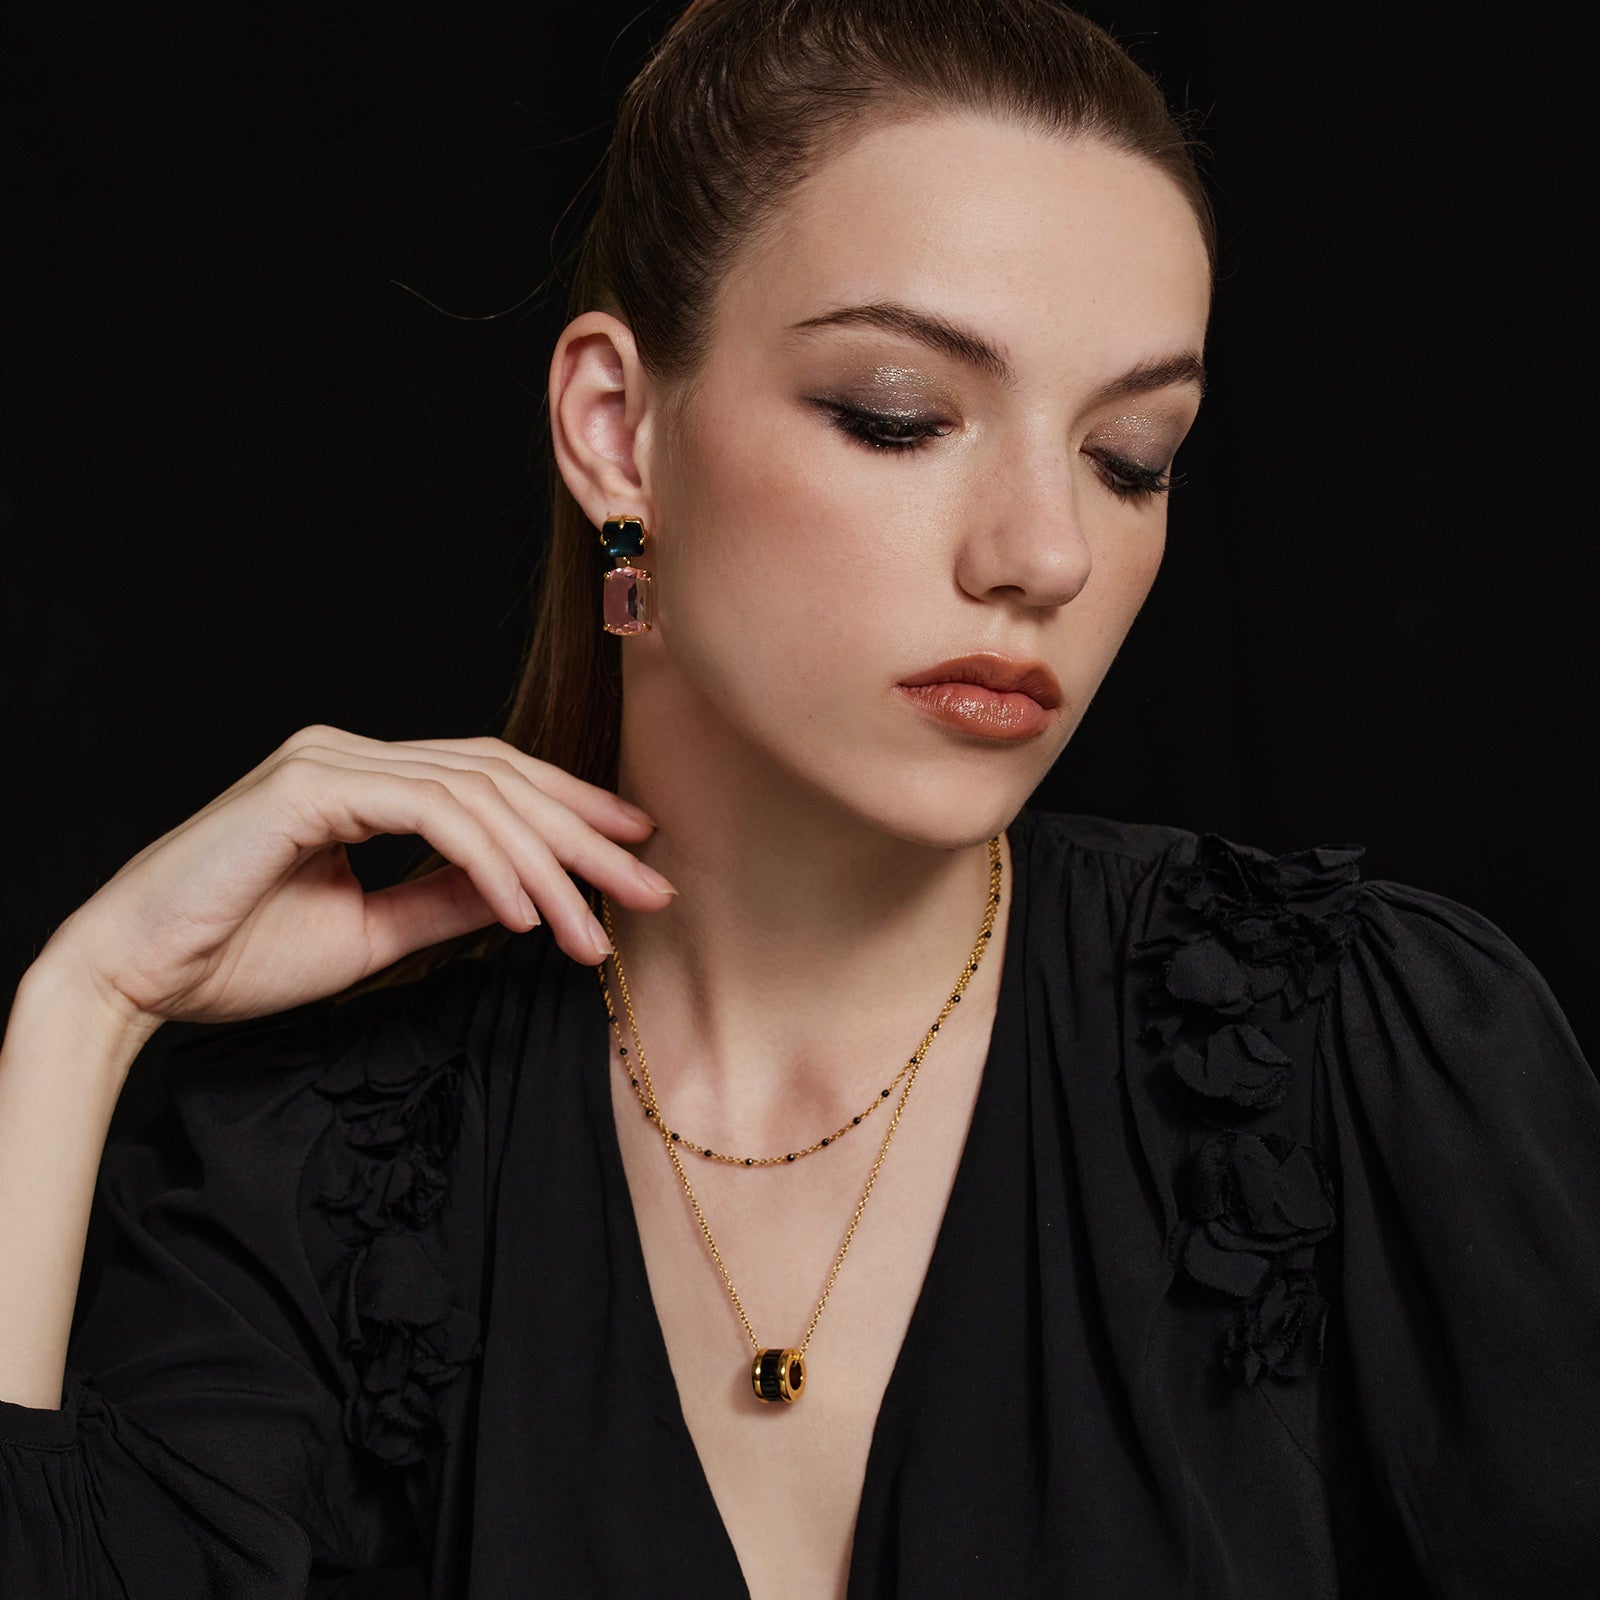 Black Ring Pendant Necklace, exuding edgy elegance, this necklace showcases a sleek black ring pendant on a delicate chain, making it a stylish and contemporary accessory for any occasion.